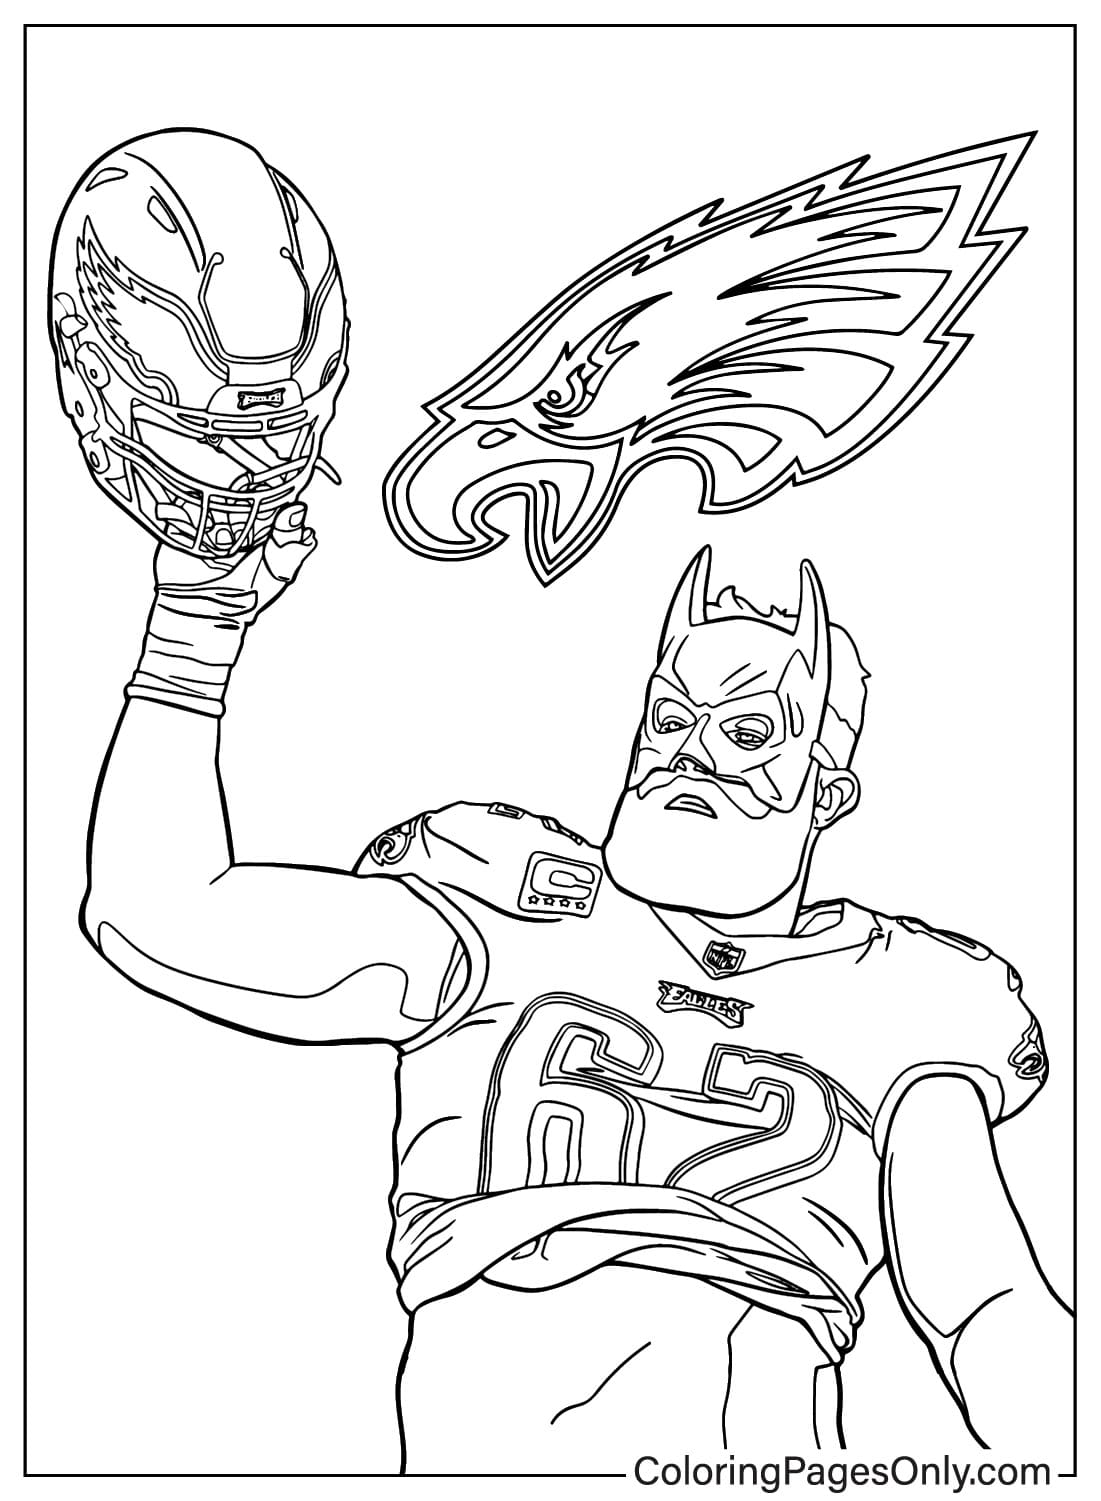 Jason Kelce Coloring Page Free from Philadelphia Eagles